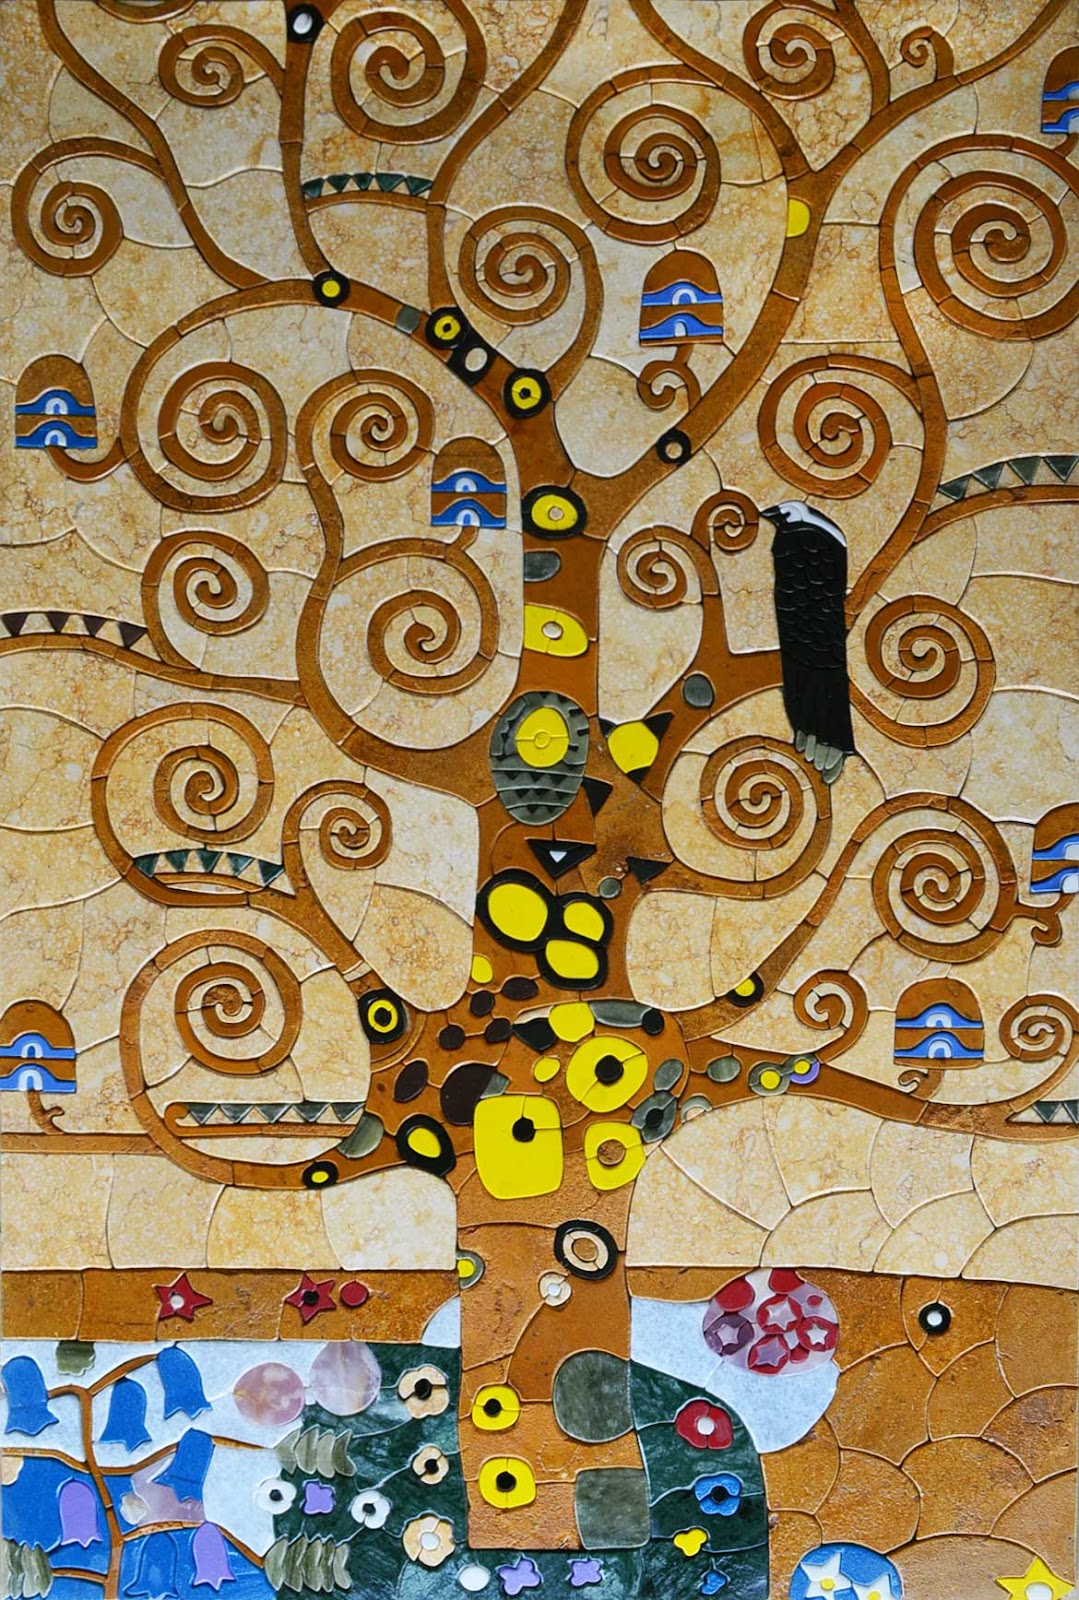 “The Tree of Life” by Klimt - Mosaic Reproduction